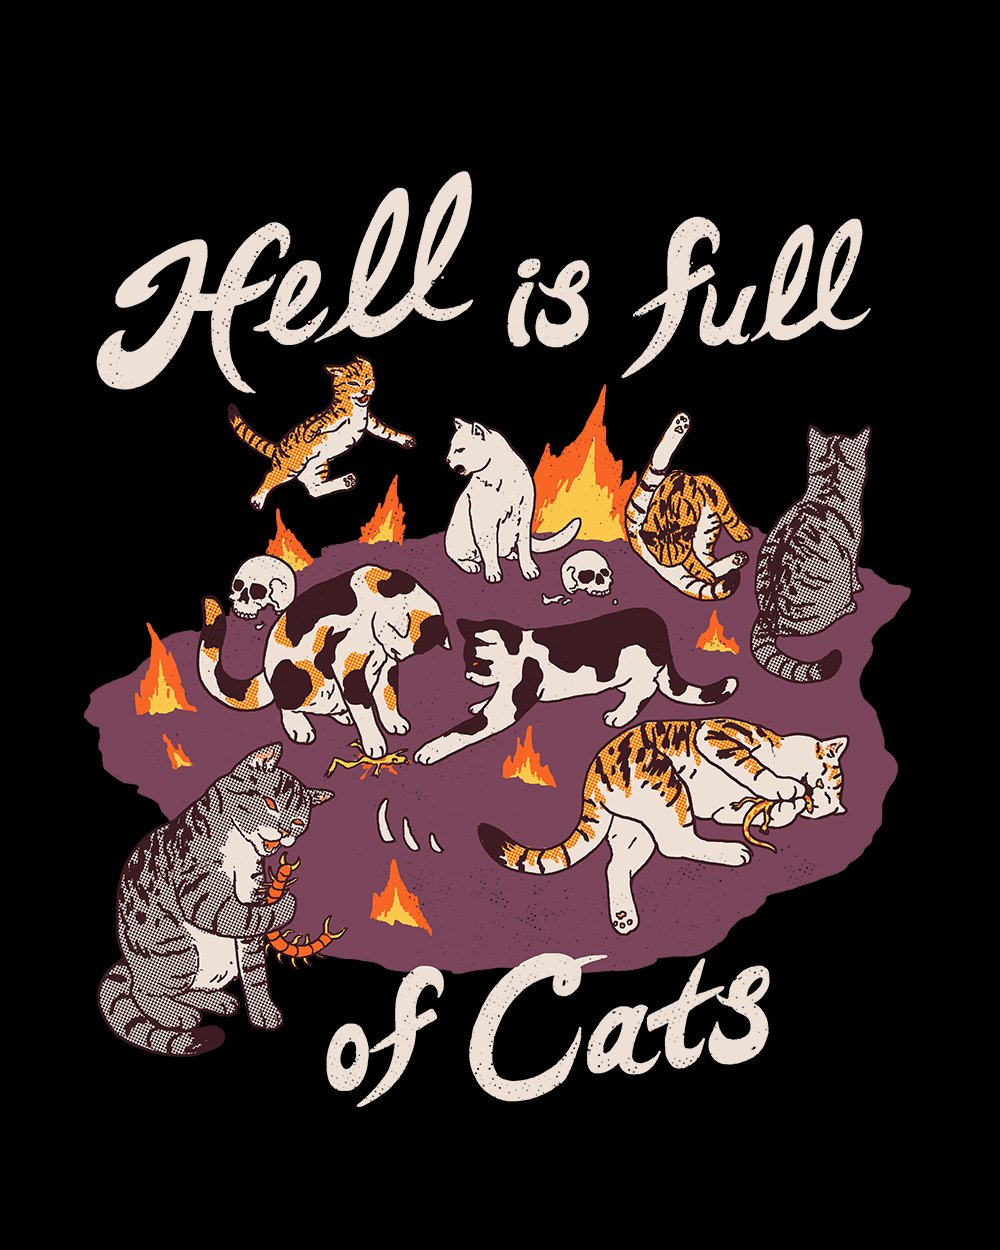 Hell is Full of Cats Hoodie Europe Online #colour_black